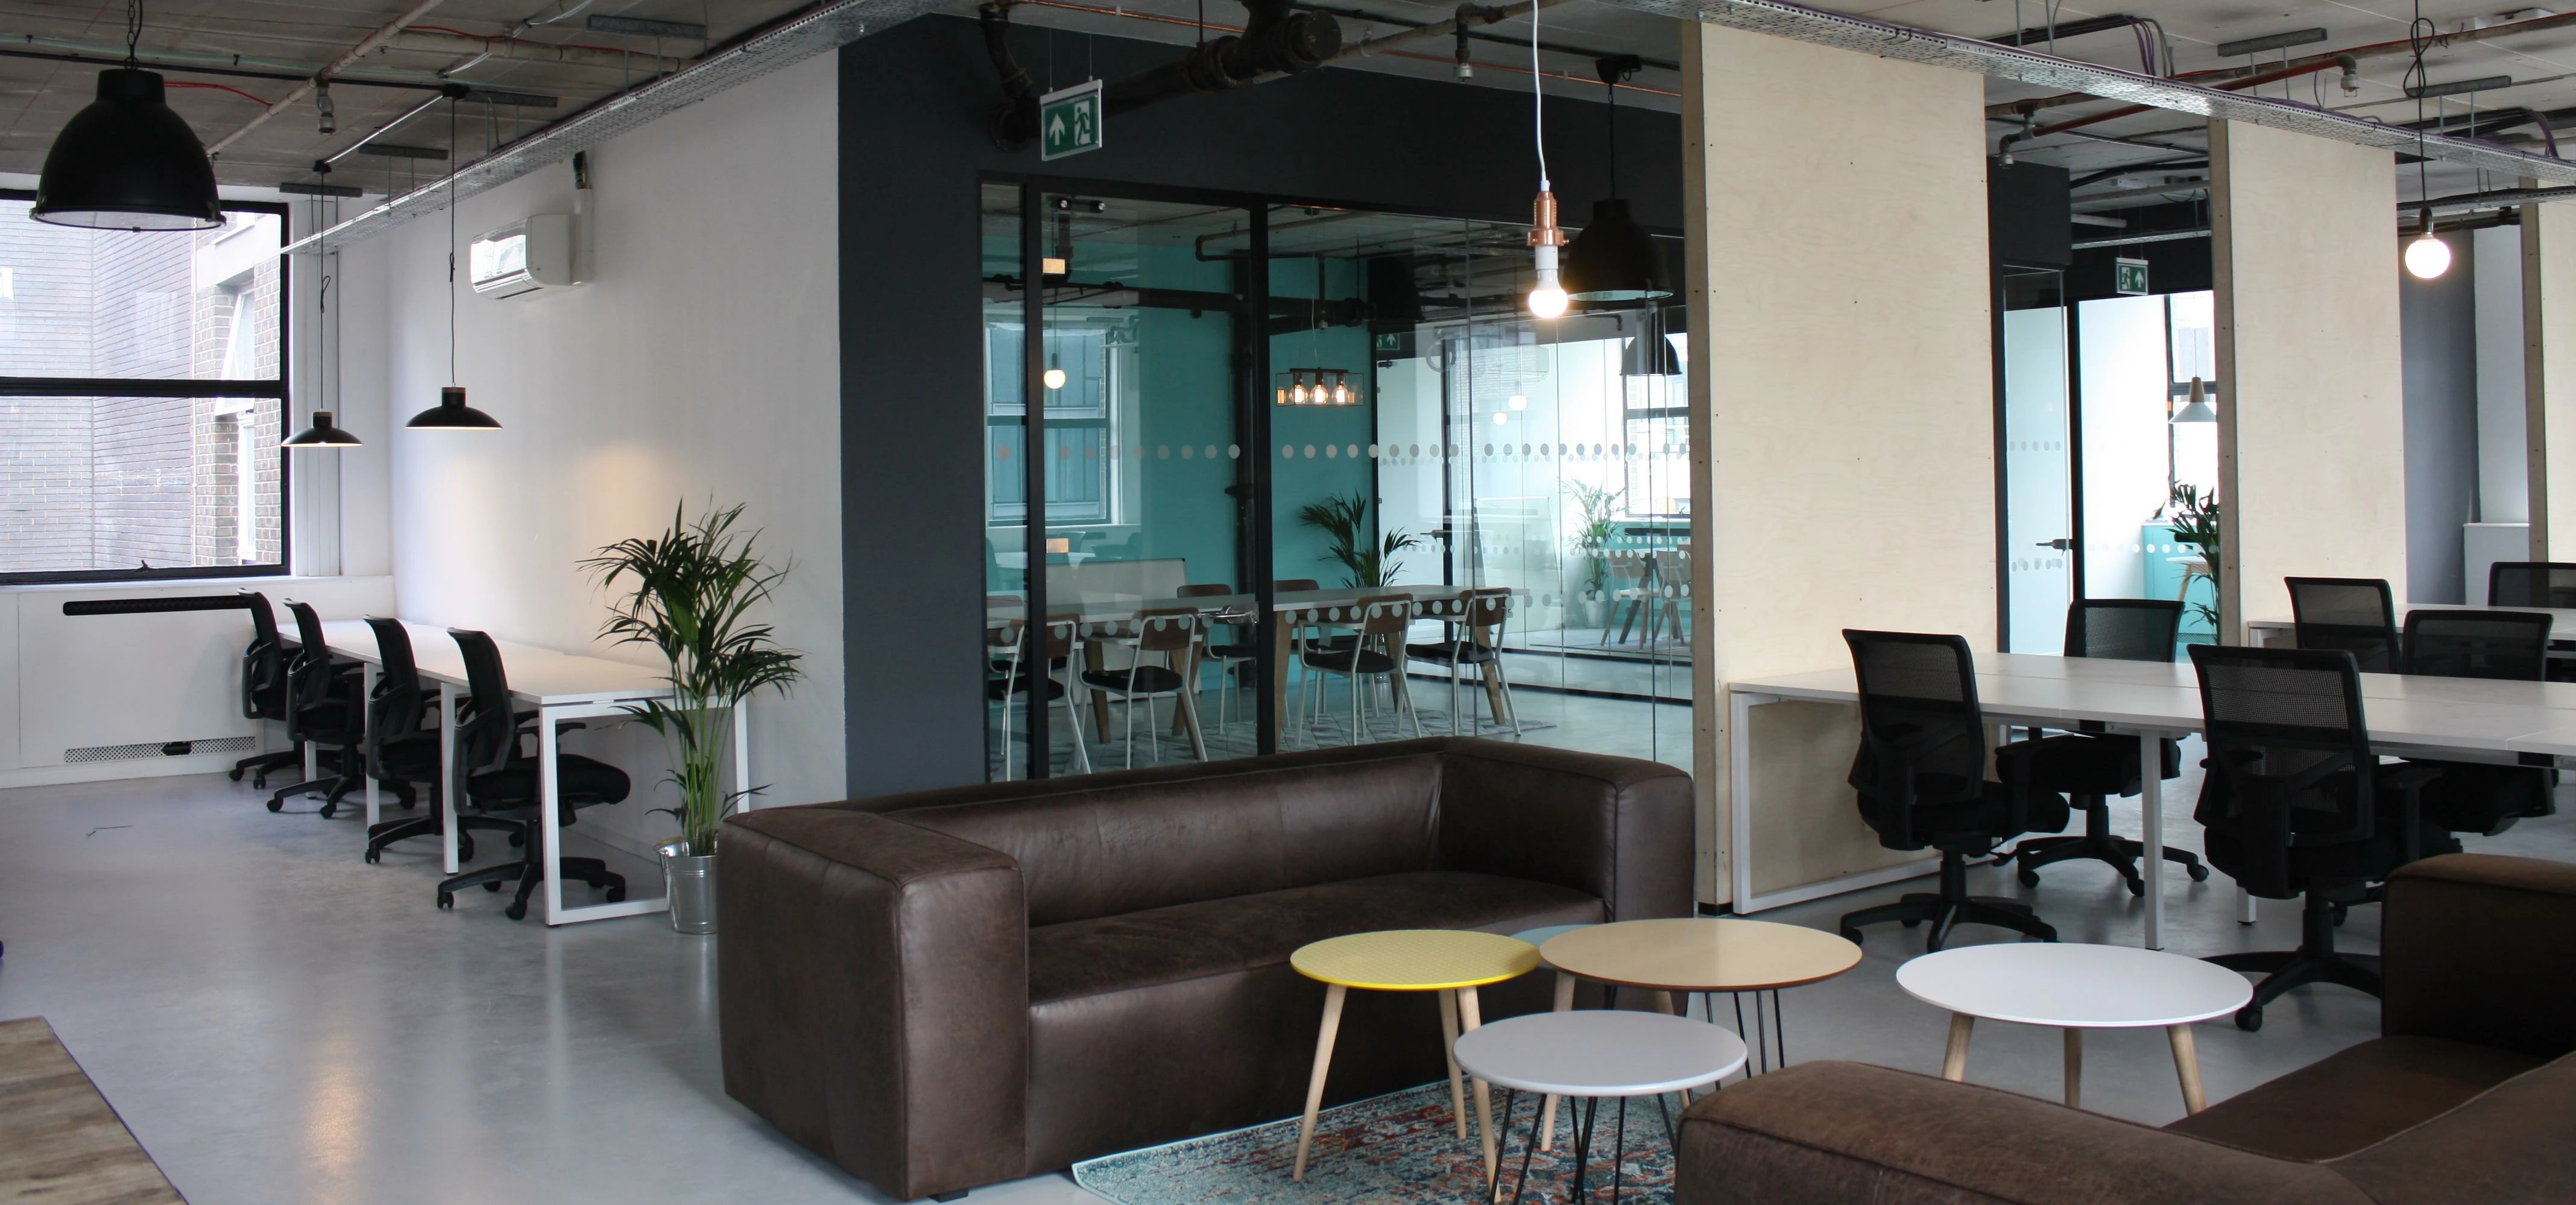 Techspace's new Aldgate coworking space.